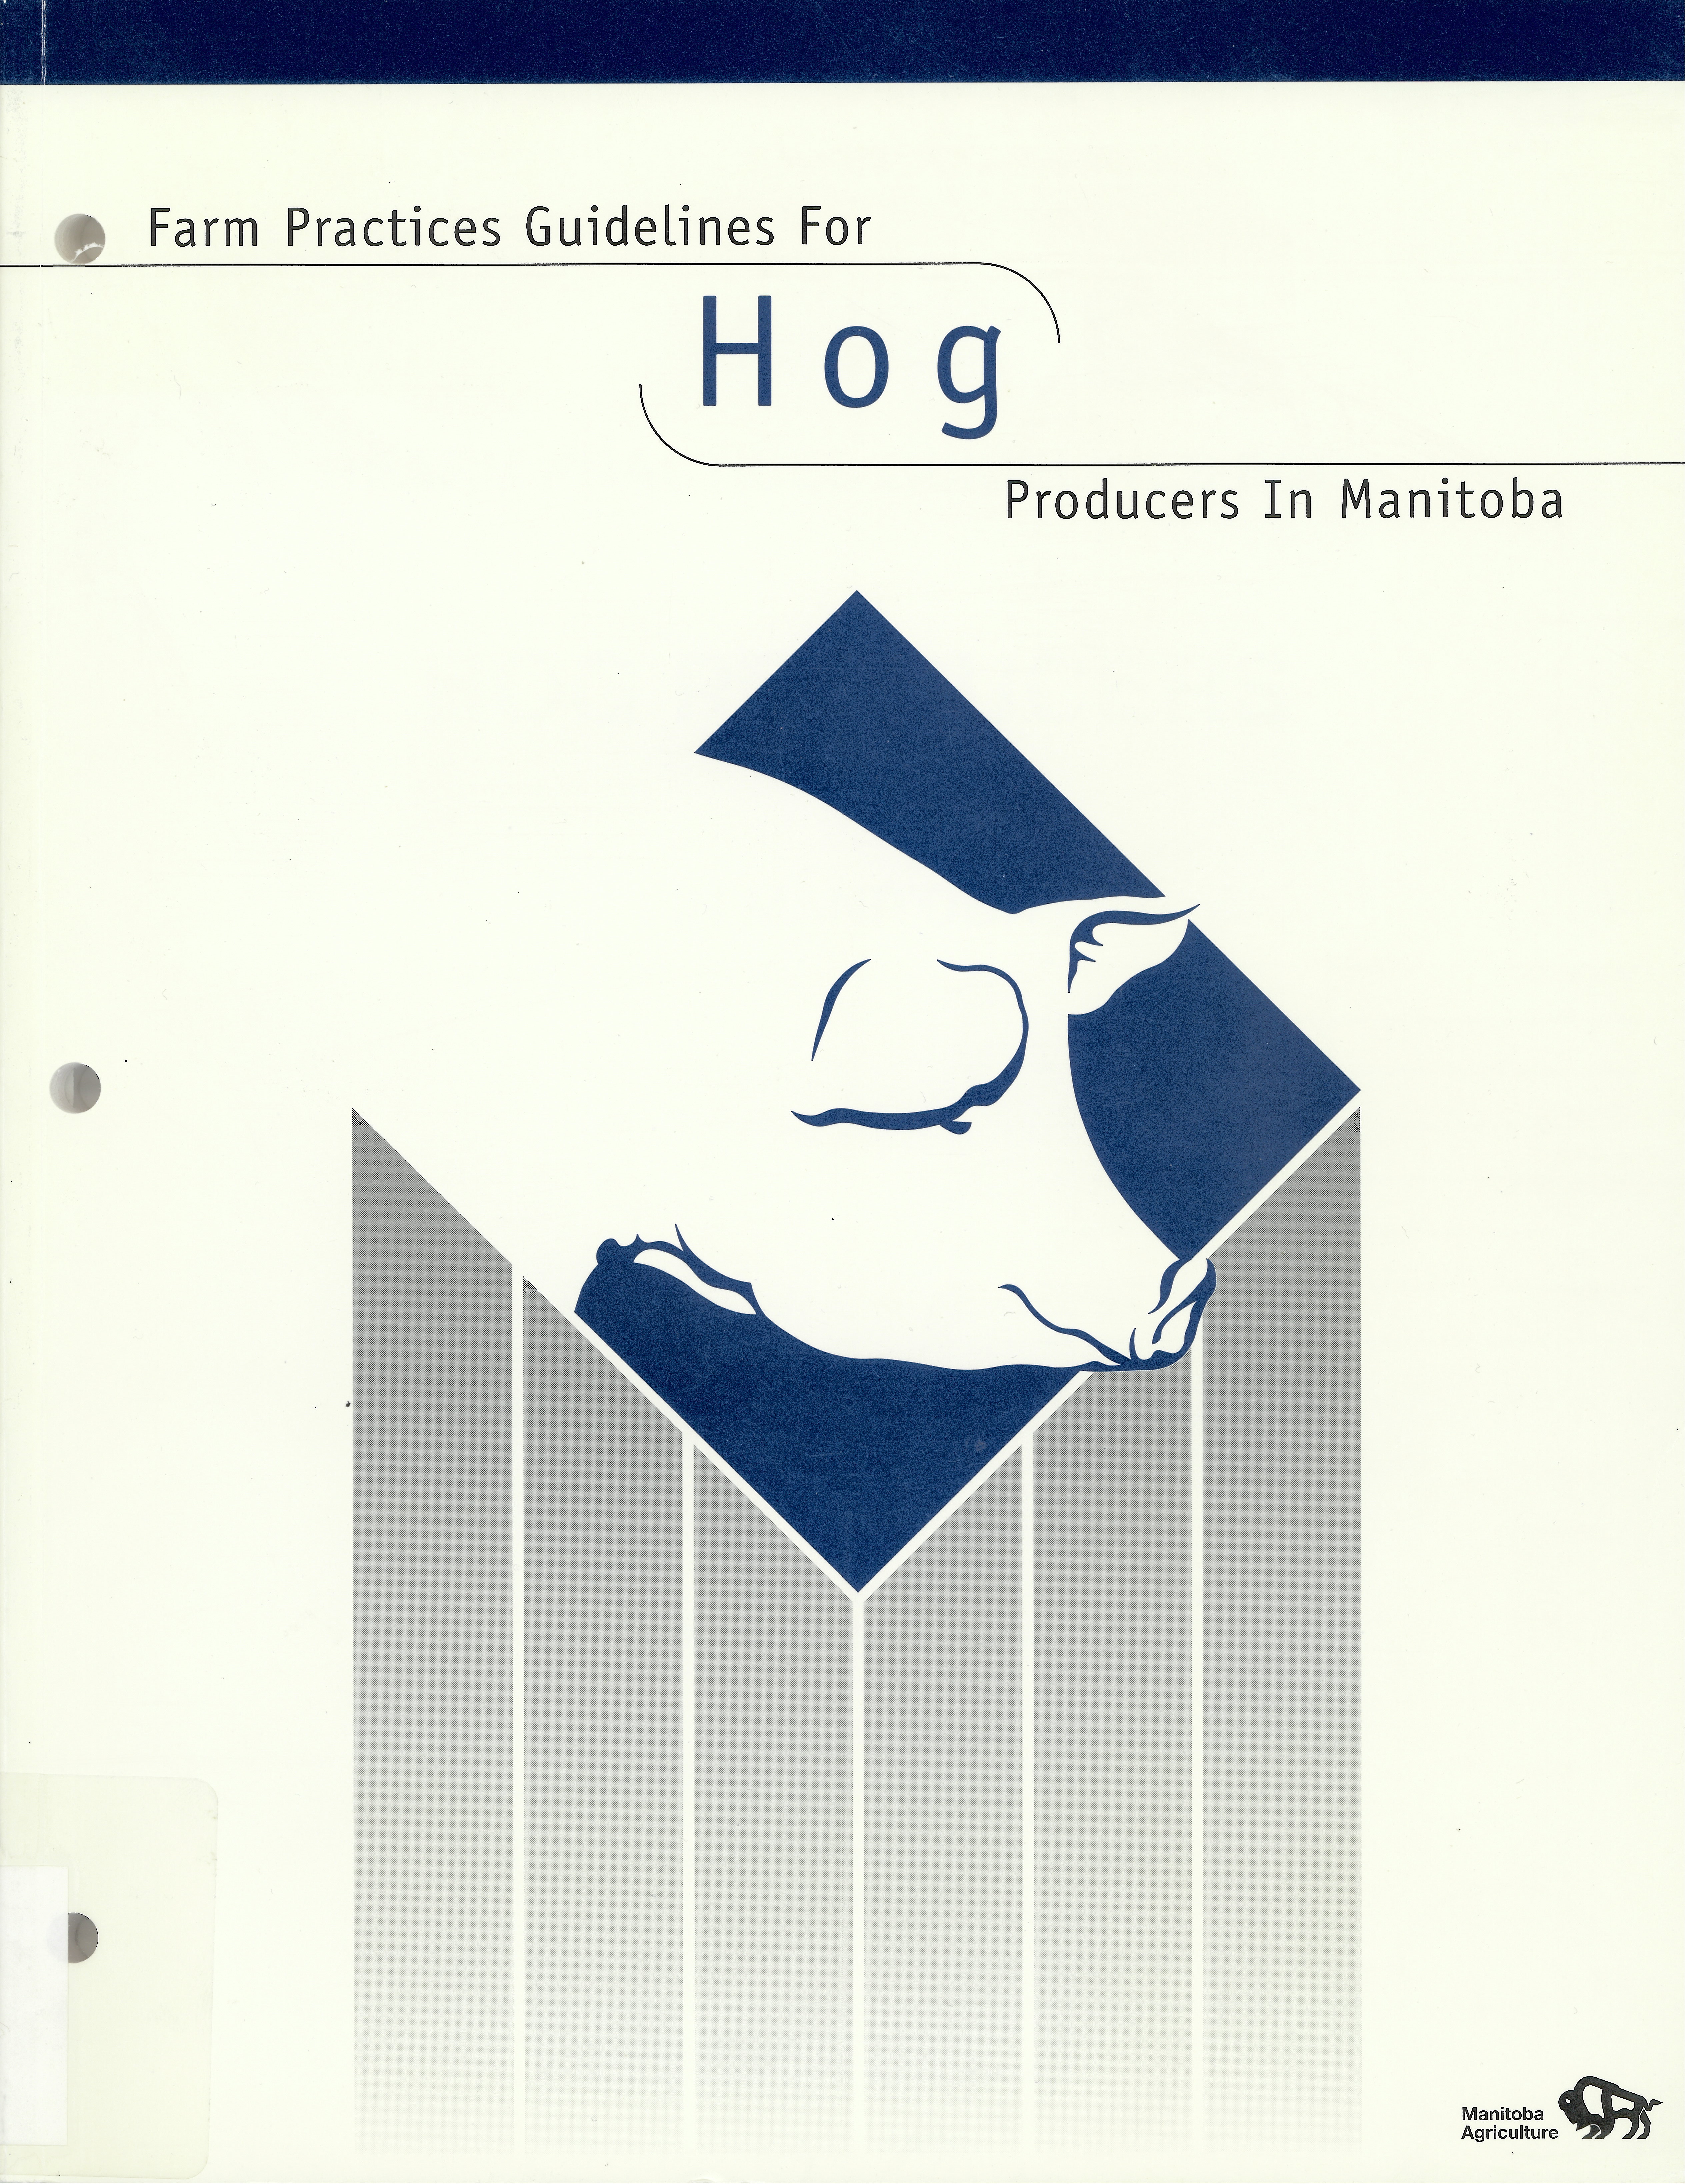 Farm practices guidelines for hog producers in Manitoba